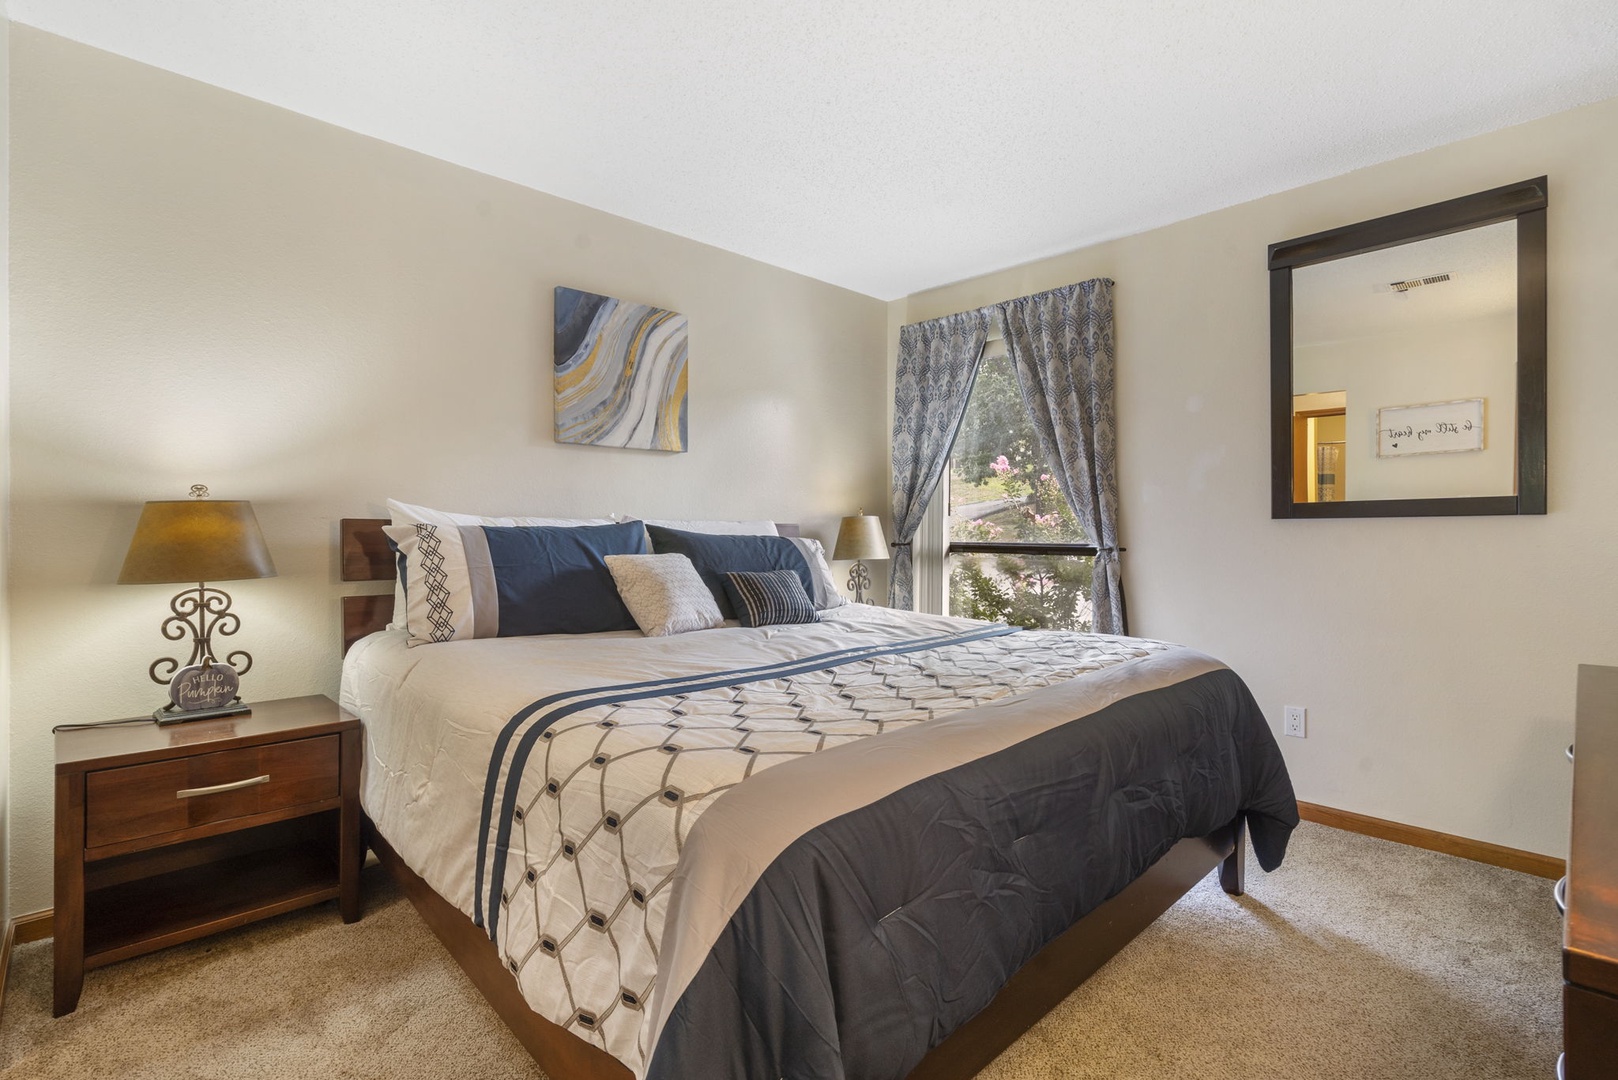 The king suite offers a private en suite, TV, and plenty of space to relax